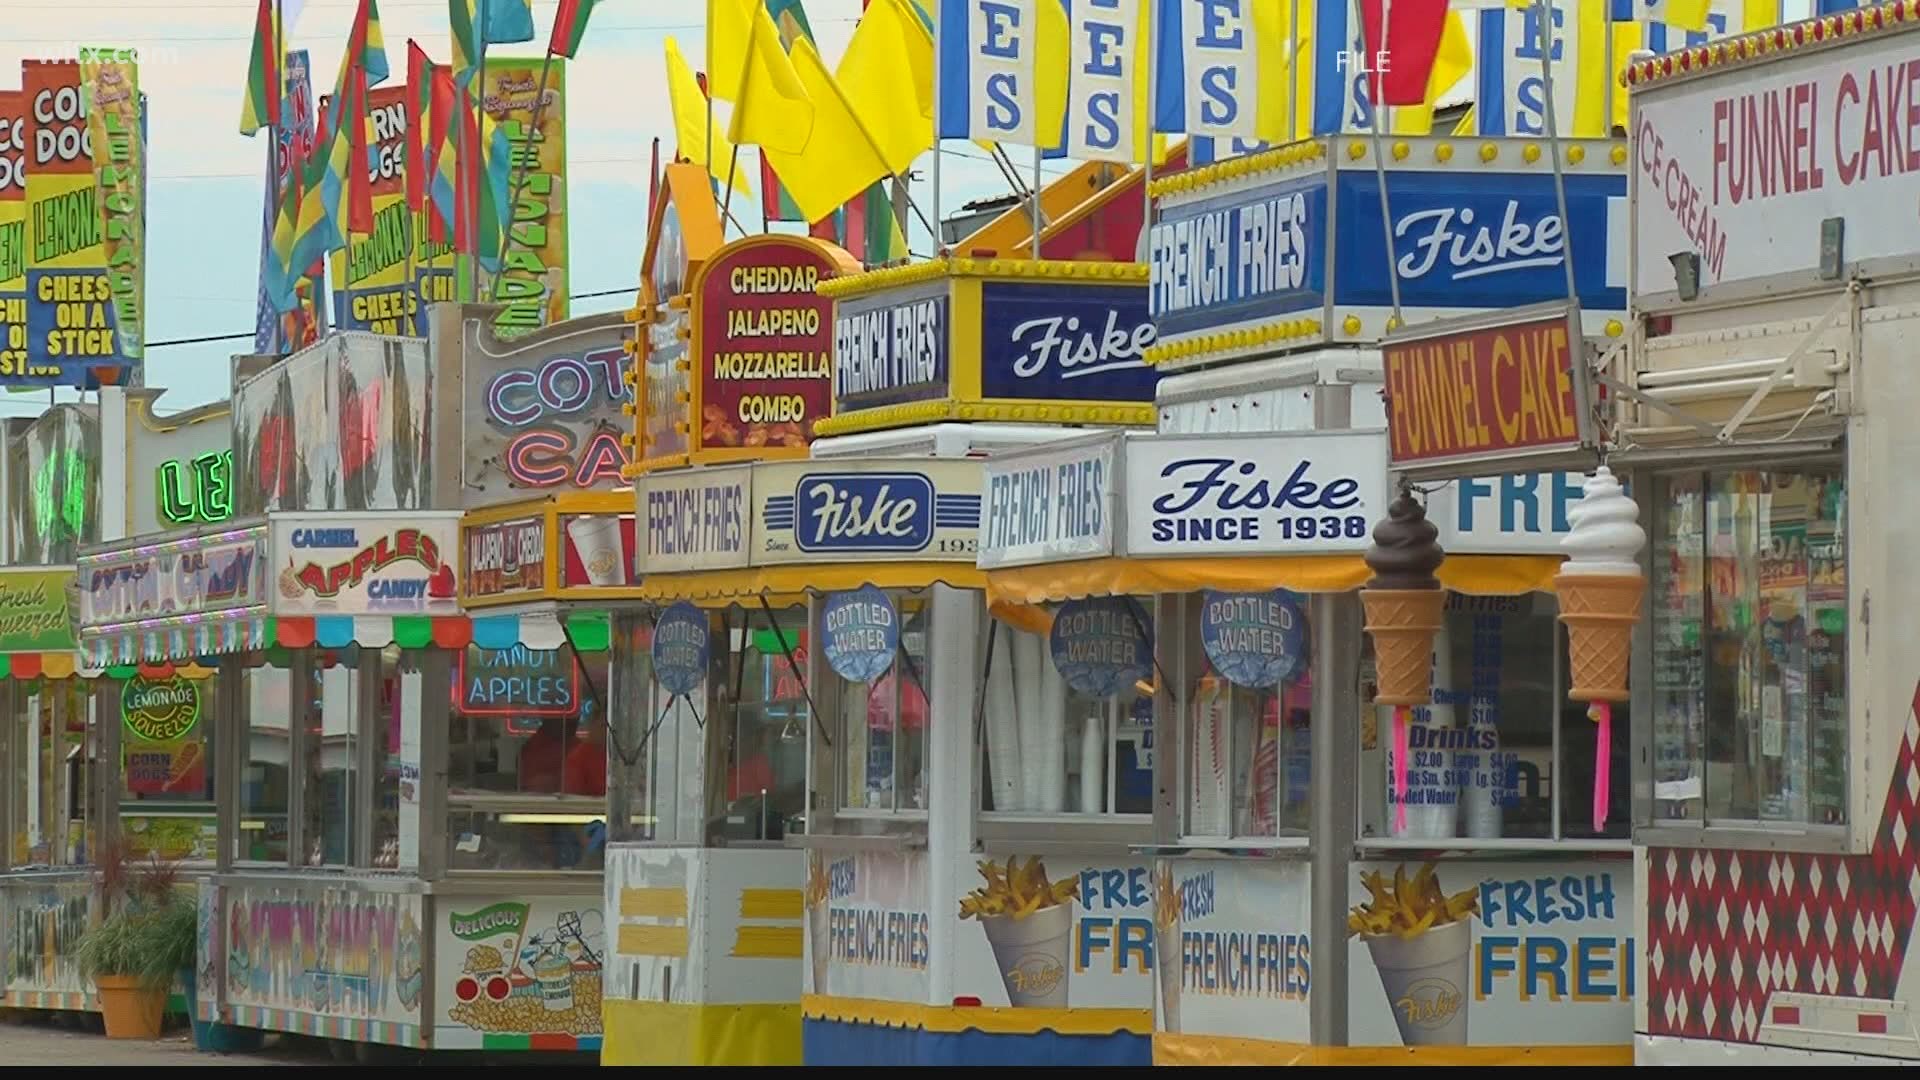 Its cows and corndogs, rides and games this year with the Orangeburg county fair coming back after a year off due to the pandemic.